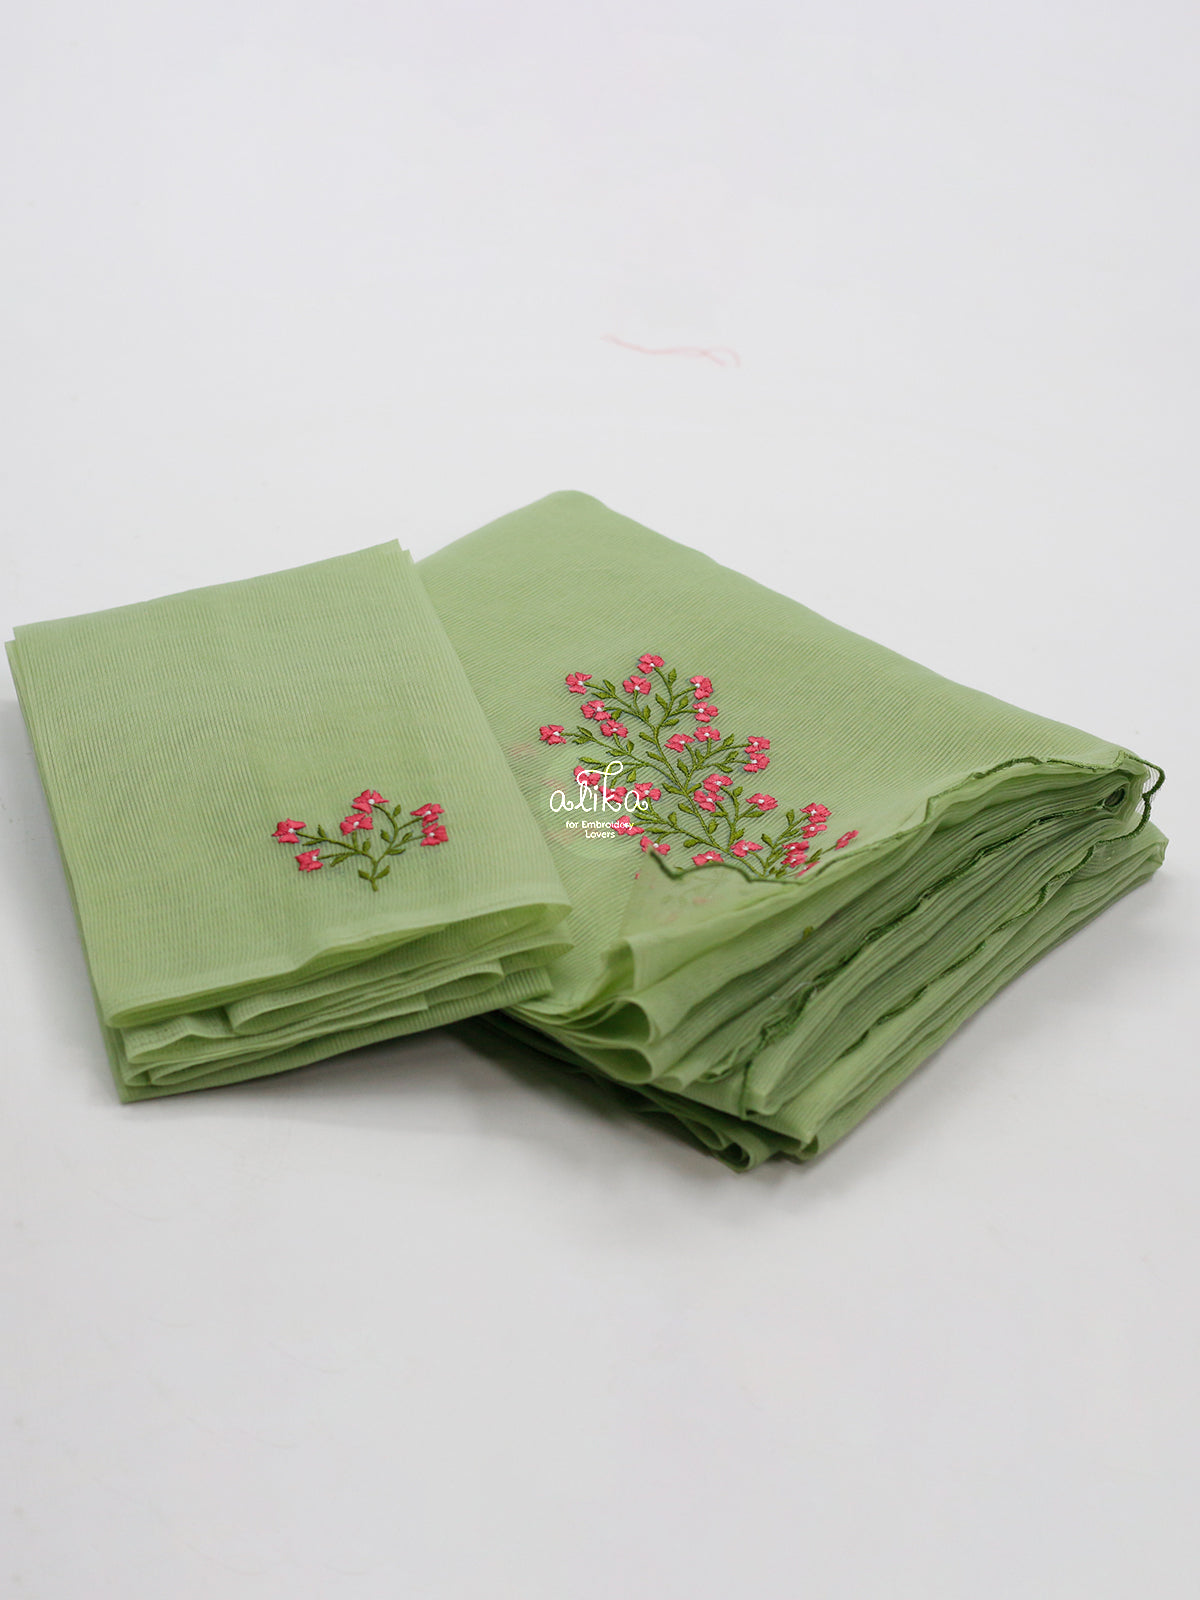 GREEN KOTA SAREE WITH FLORAL MACHINE EMBROIDERY